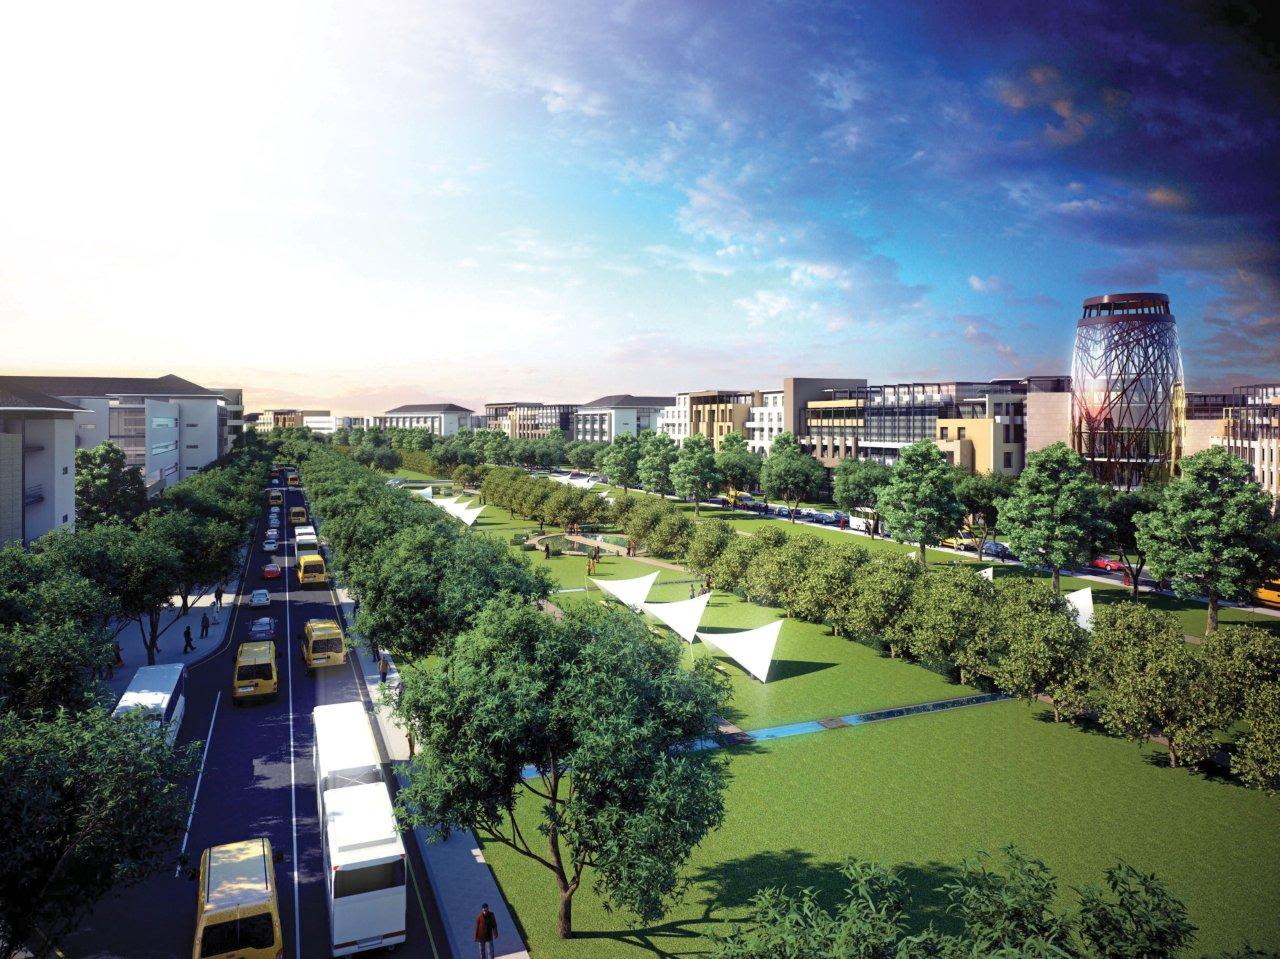 Tatu City, some 15 kilometers north of Nairobi, is being developed by Rendeavour, the urban development branch of Moscow-based Renaissance Group, which is also responsible for several other projects across Africa.